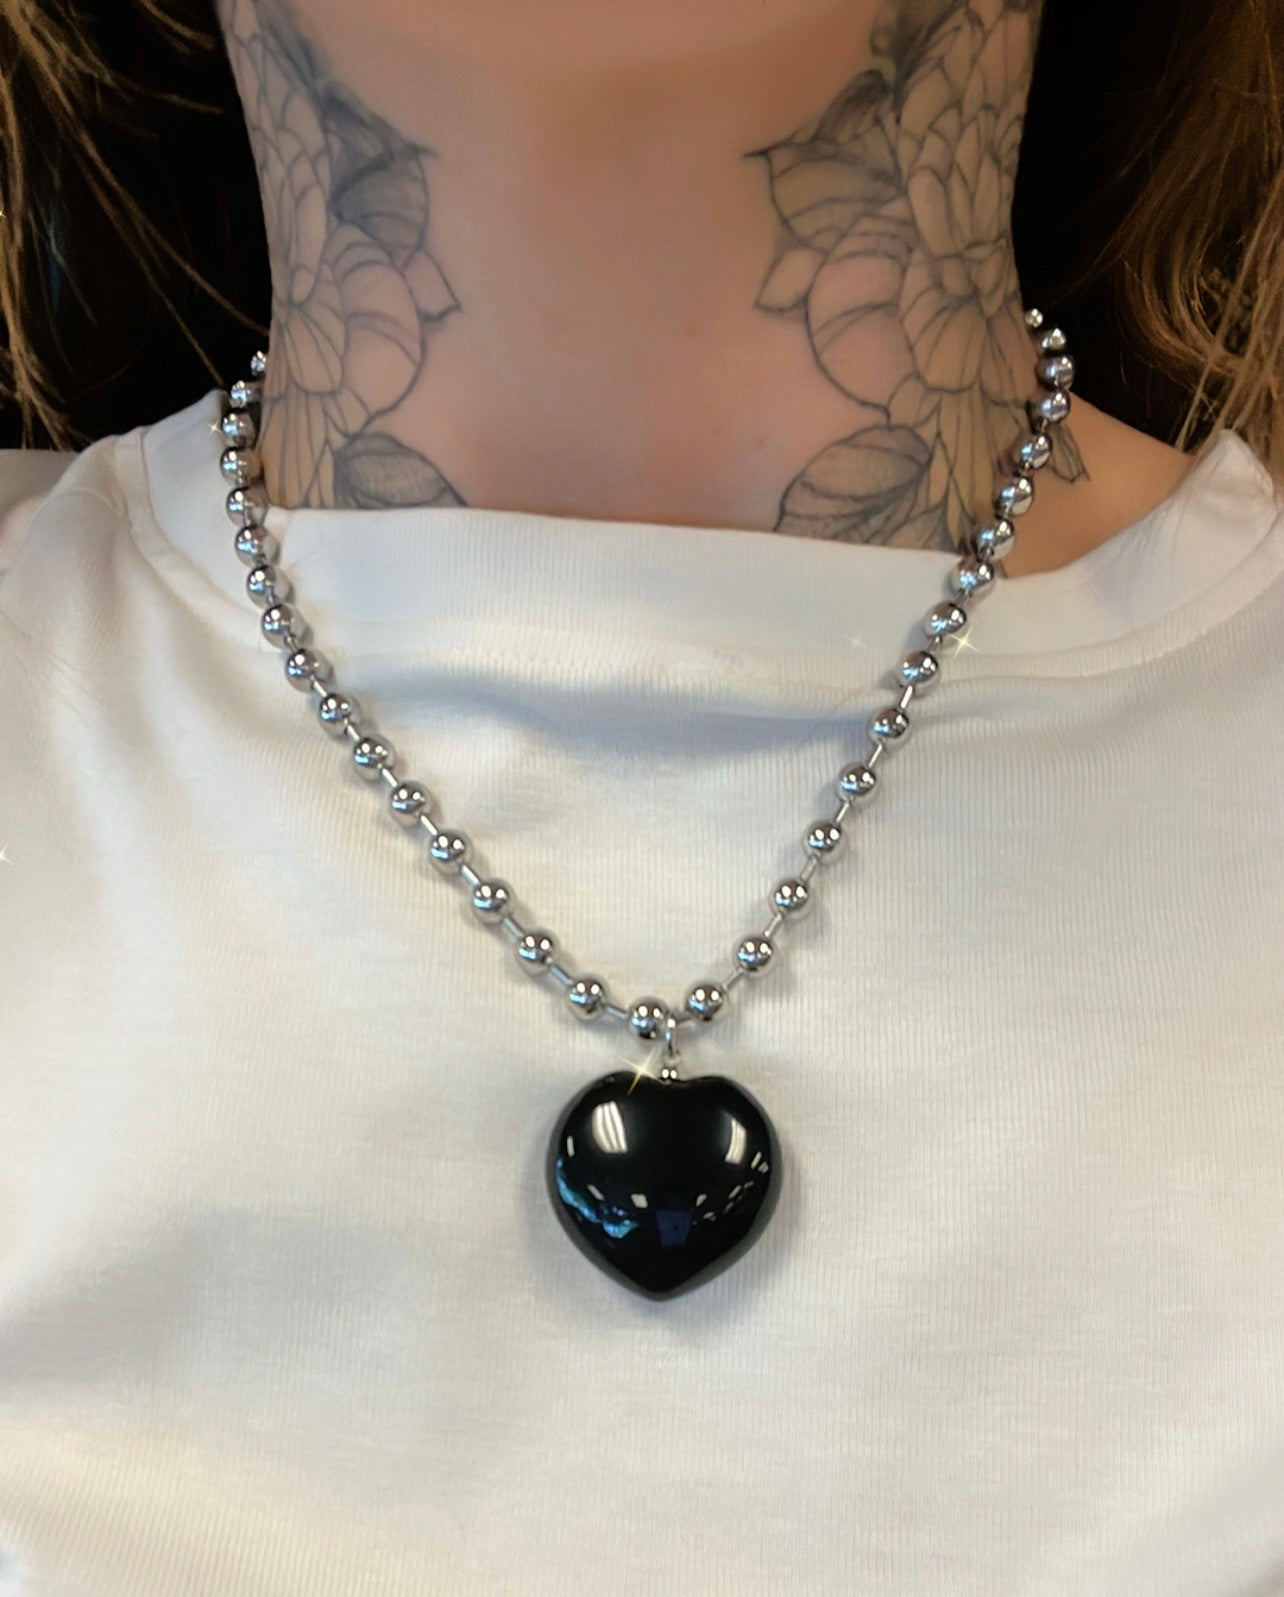 BLACK OBSIDIAN BALL CHAIN HEART NECKLACE-purification, fulfillment, new beginnings, outer manifestation